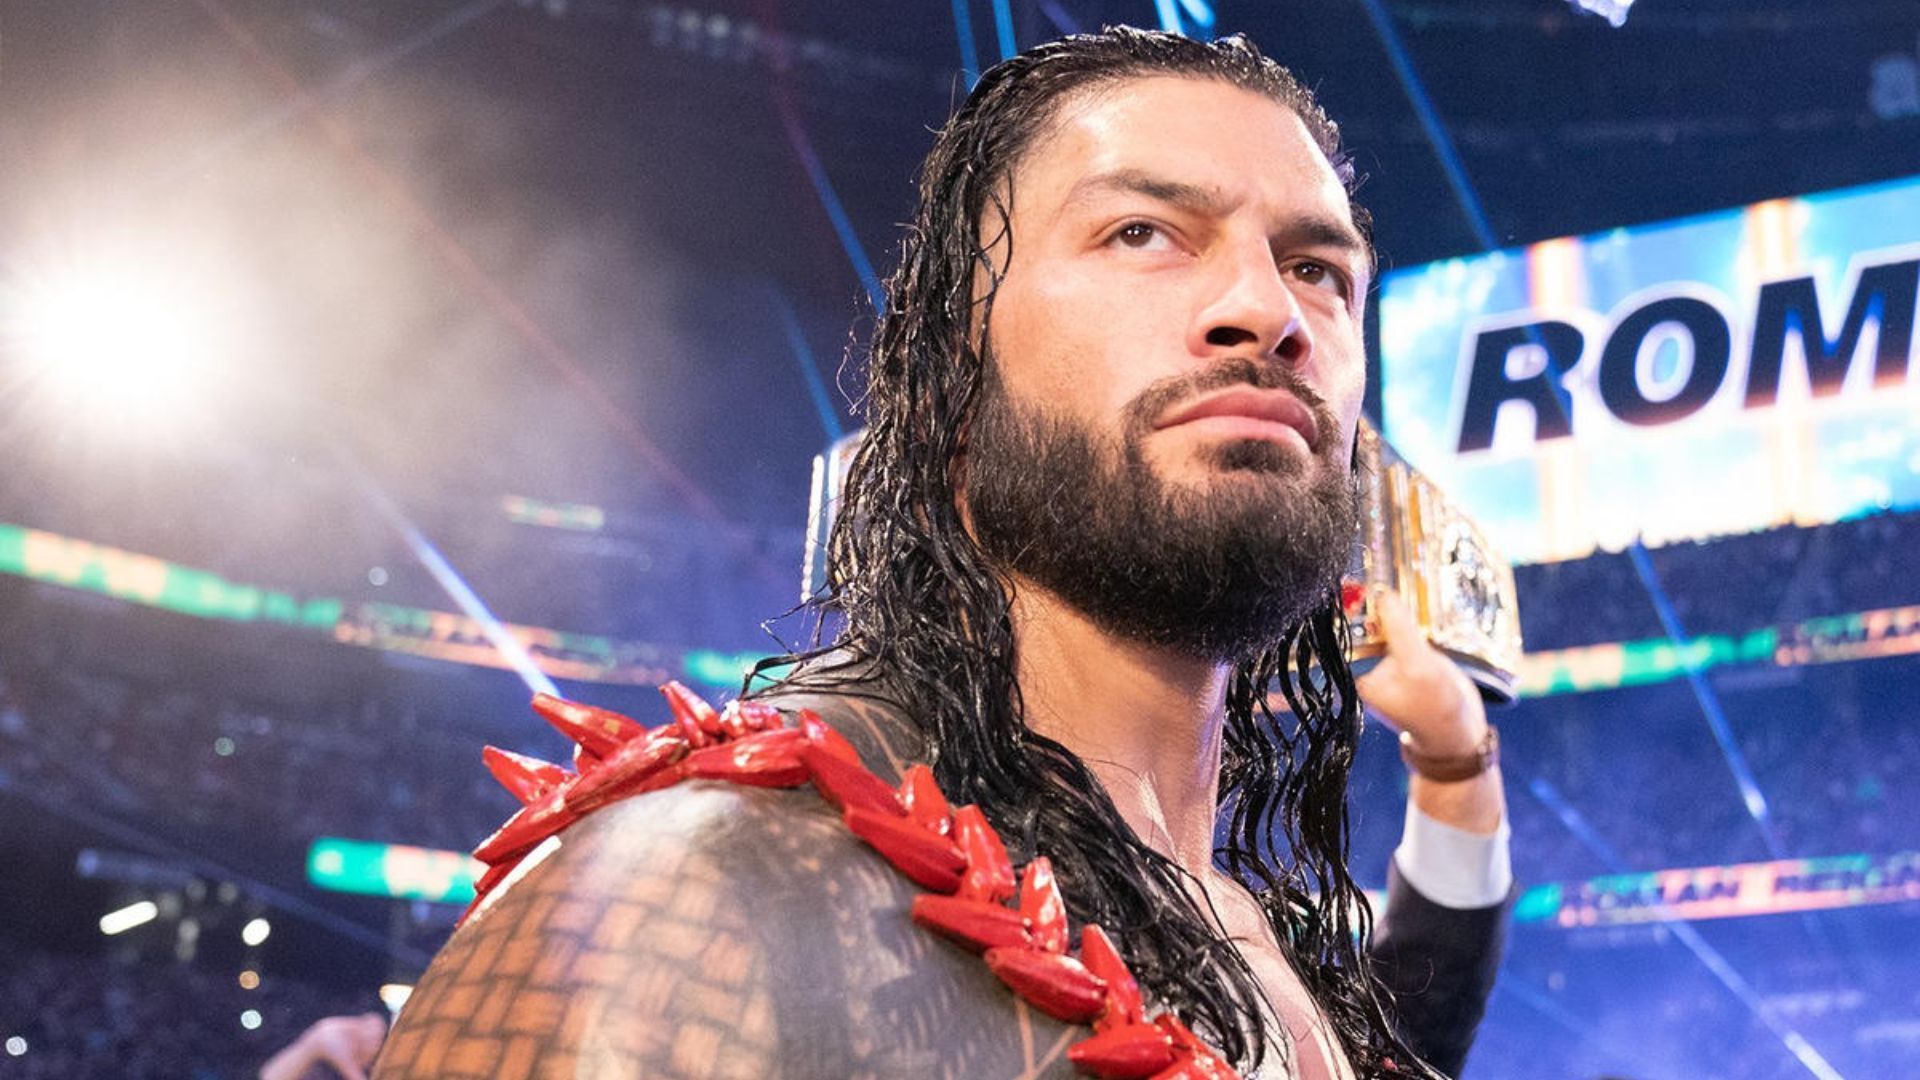 Roman Reigns during his entrance. Image Credits: wwe.com 